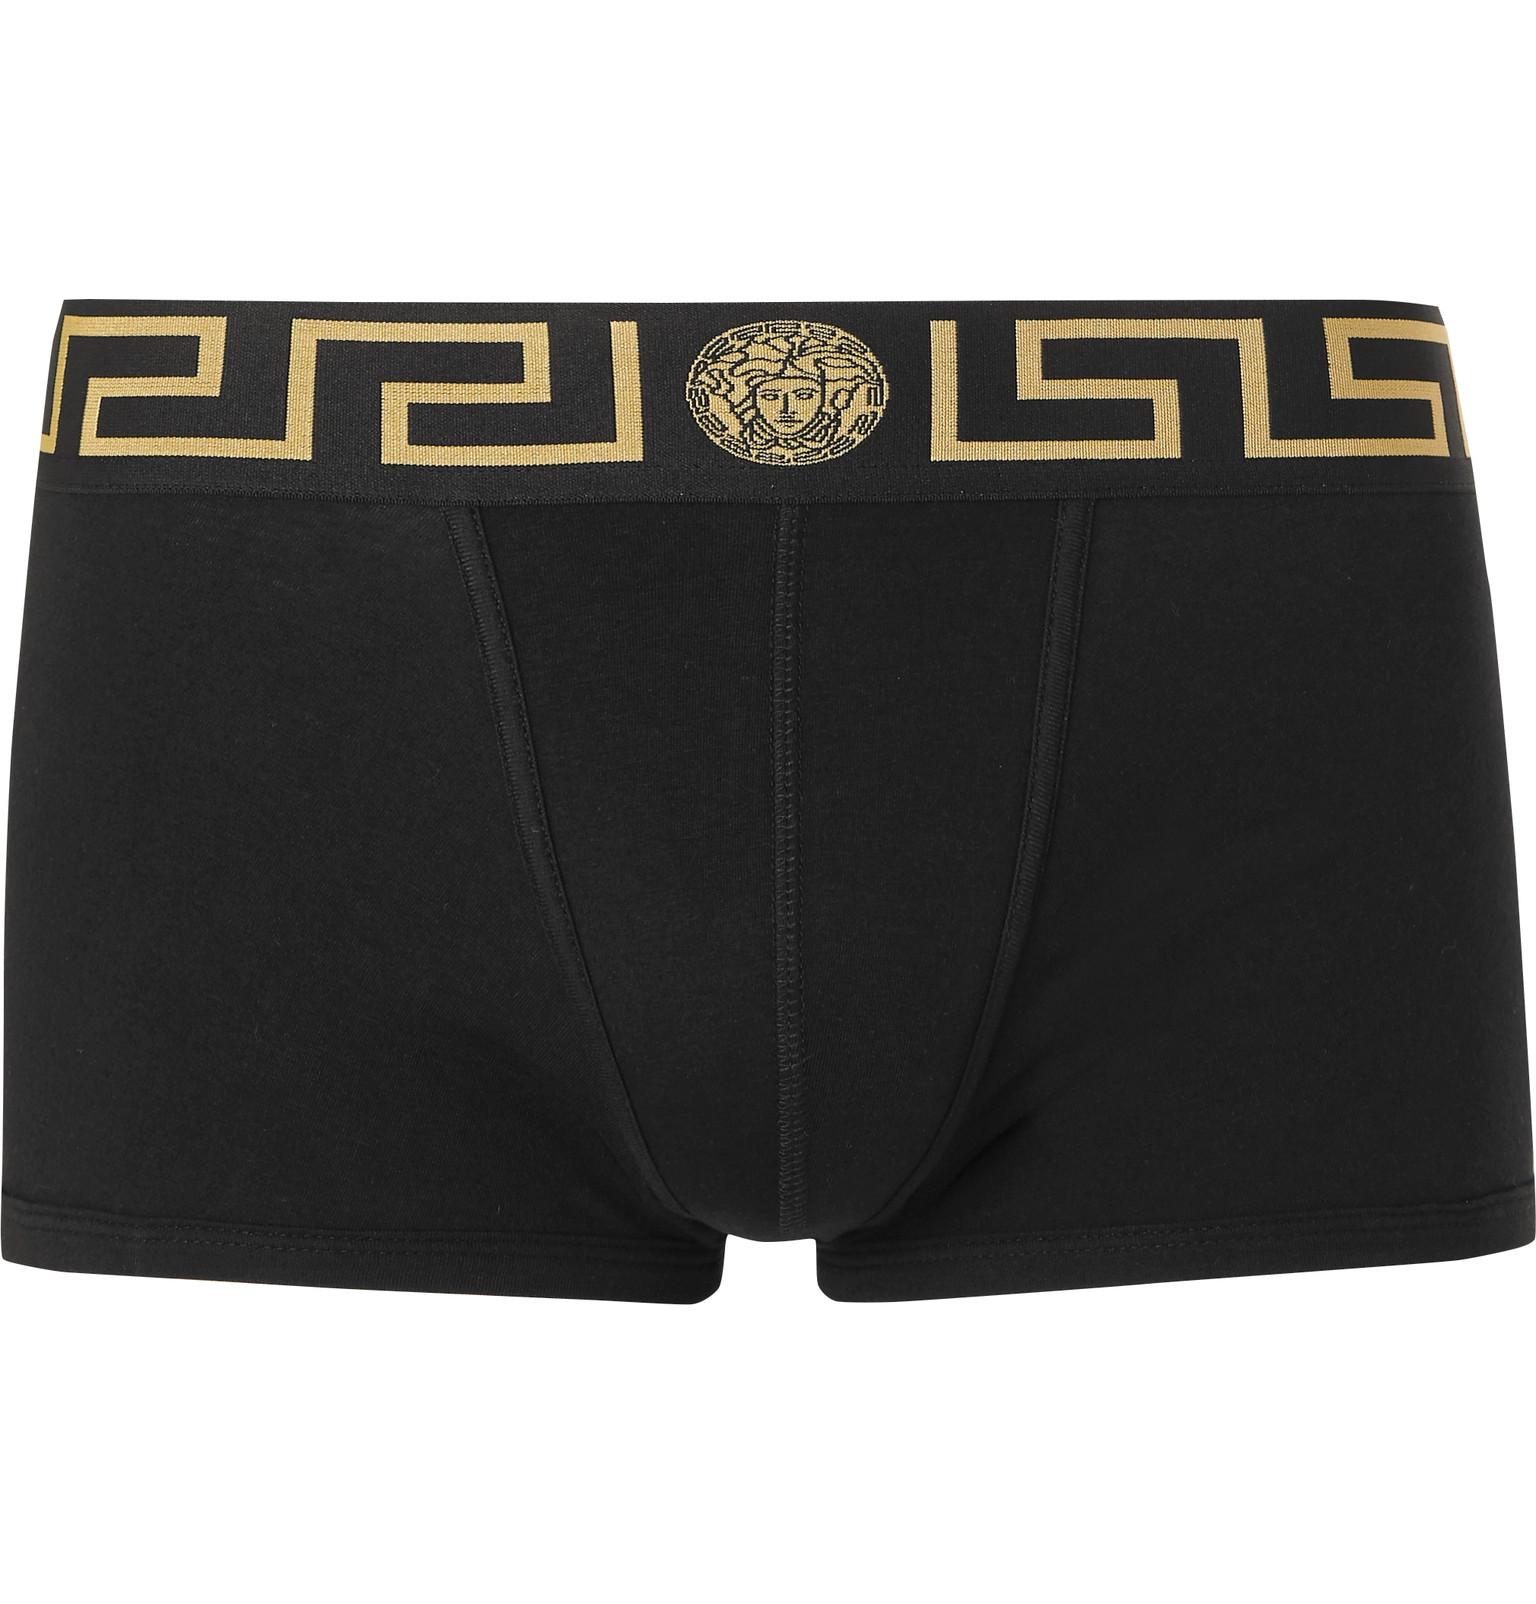 Versace Pack Of 3 Stretch Cotton Boxer Briefs in Black for Men - Save ...